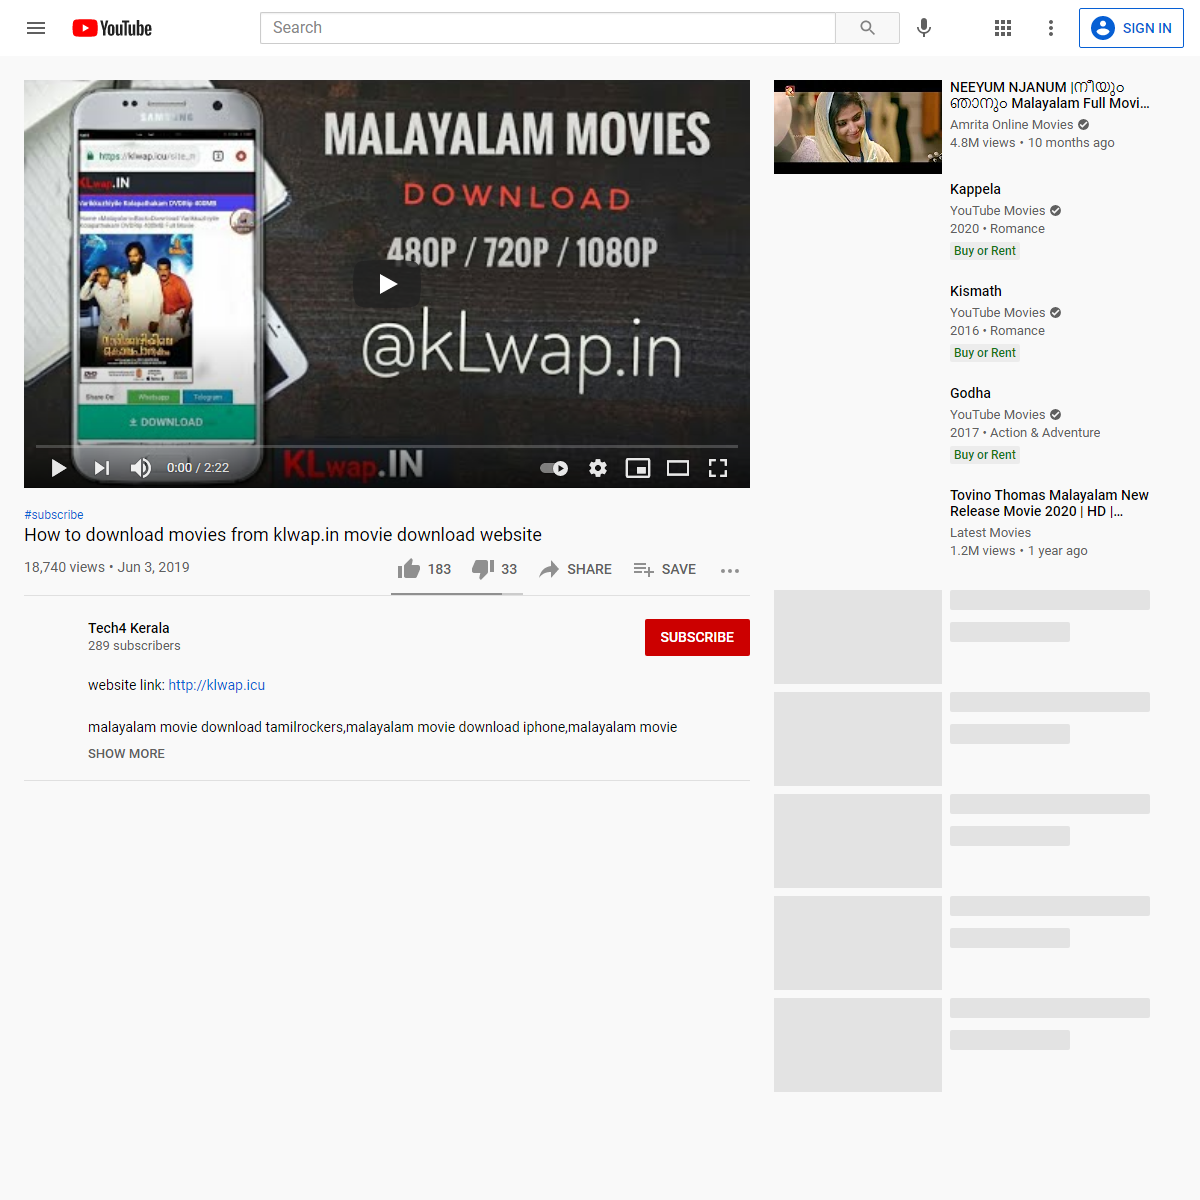 How to download movies from klwap.in movie download website - YouTube